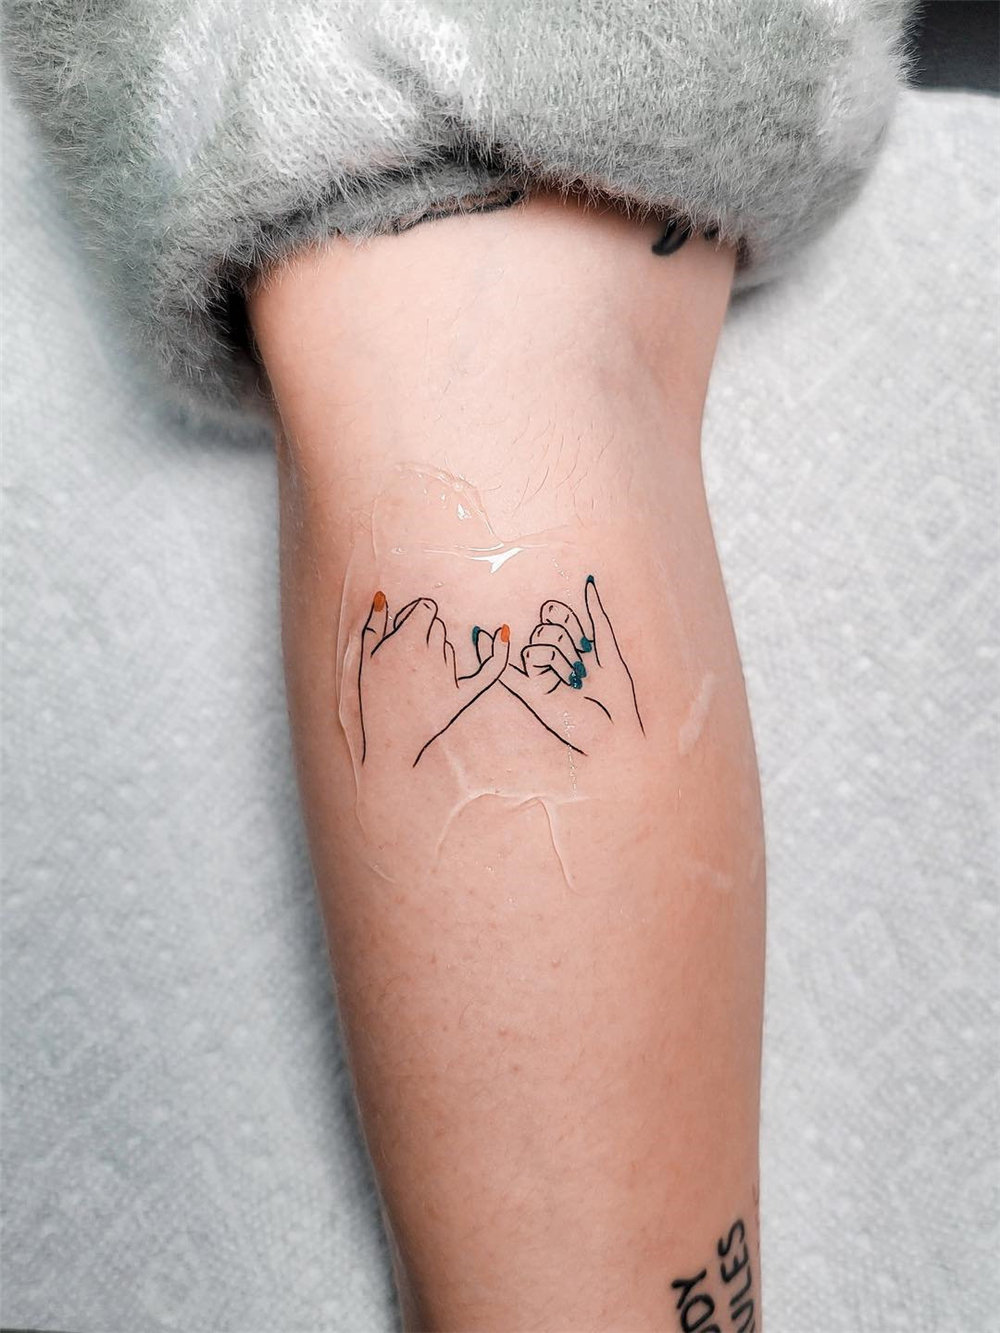 small tattoo for women, small tattoos with meaning, simple small tattoos for women, cute small tattoo ideas, #smalltattoos simpletattoos #tattoosforwomen